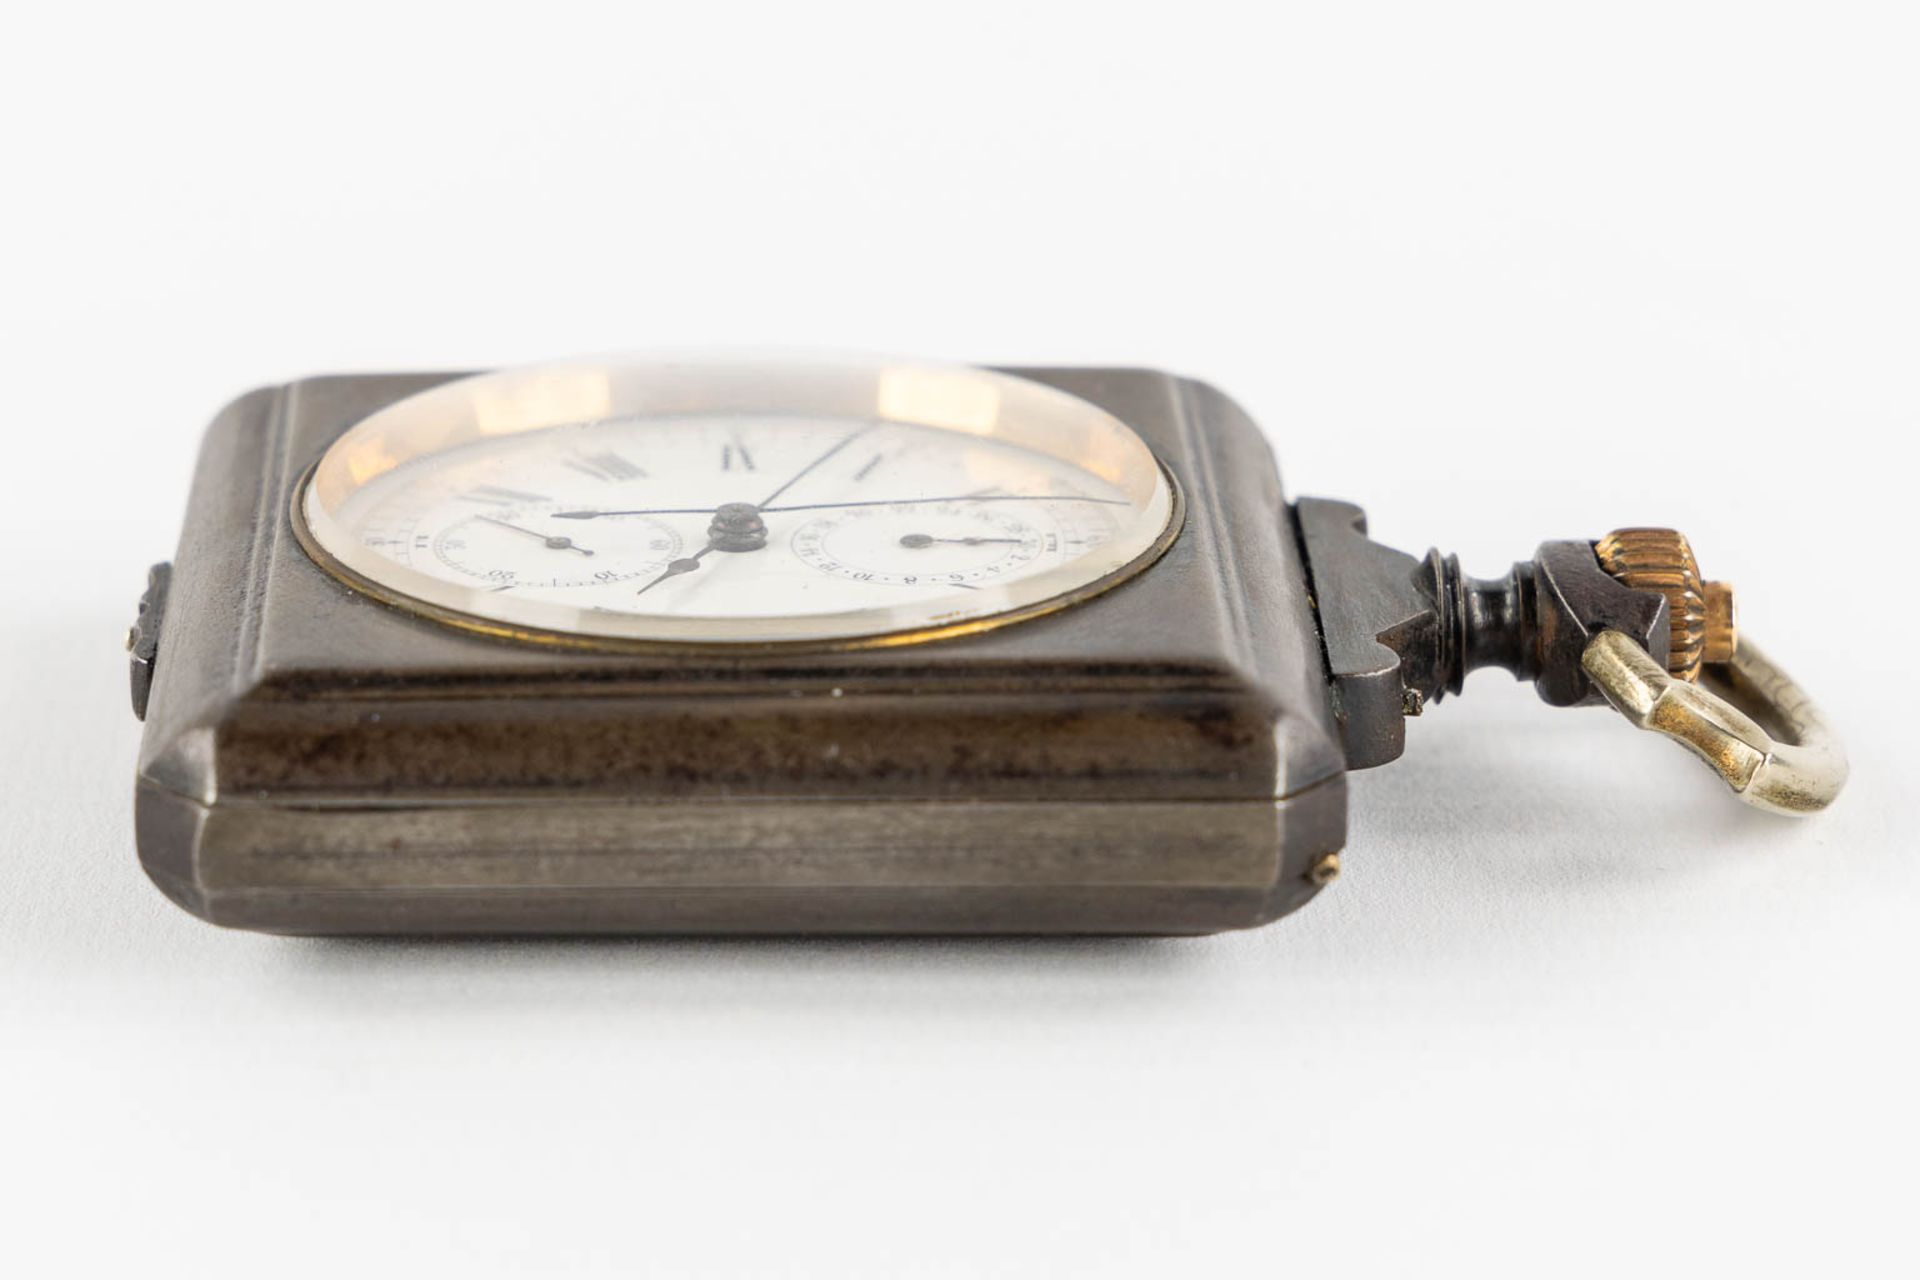 An antique 'Chronograph' pocket watch, first half of the 20th C. (W:6,4 x H:10 cm) - Image 7 of 11